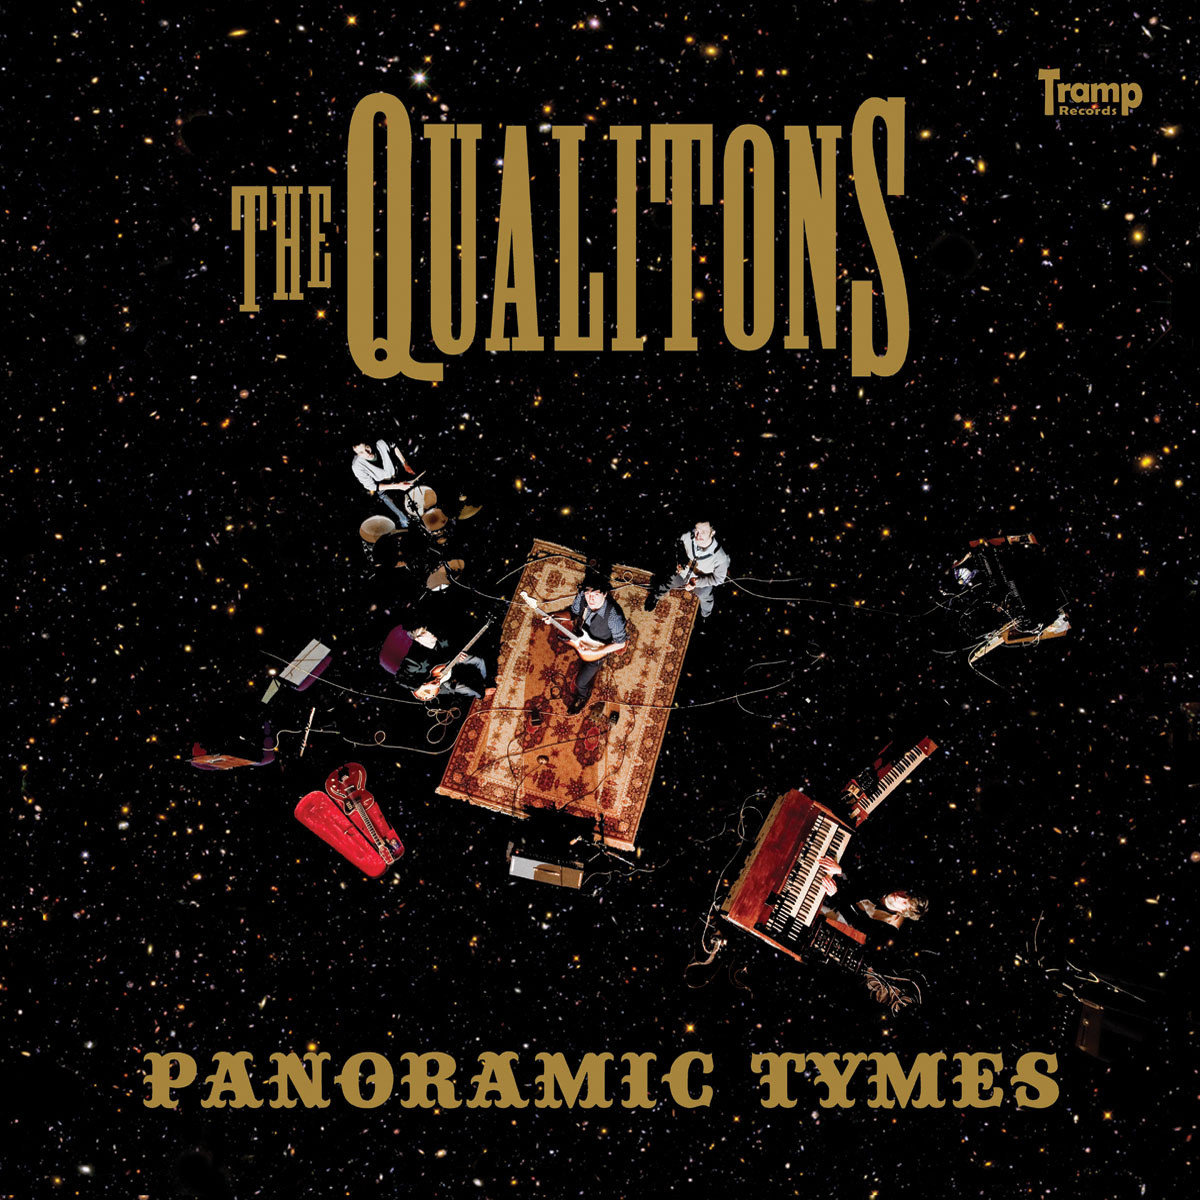 The Qualitons - Panoramic Tymes (2010) [Bandcamp FLAC 24bit/48kHz]